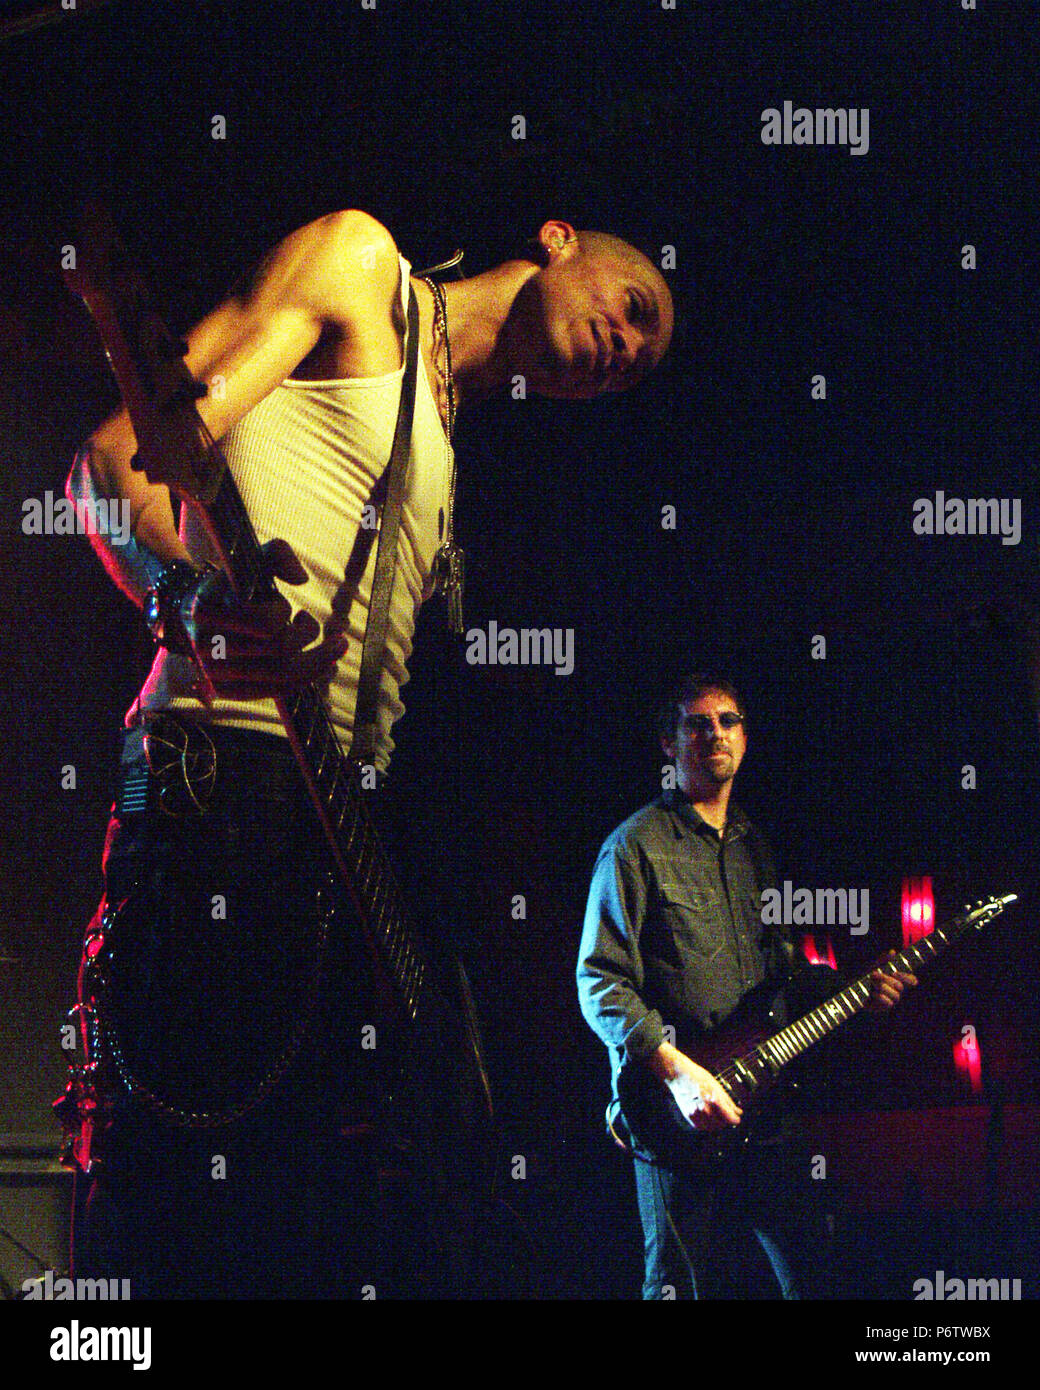 ATHENS, GA - January 31: Doug Pinnick and Ty Tabor of King's X perform at the 40 Watt Club in Athens, Georgia on January 31, 2002. CREDIT: Chris McKay / MediaPunch Stock Photo